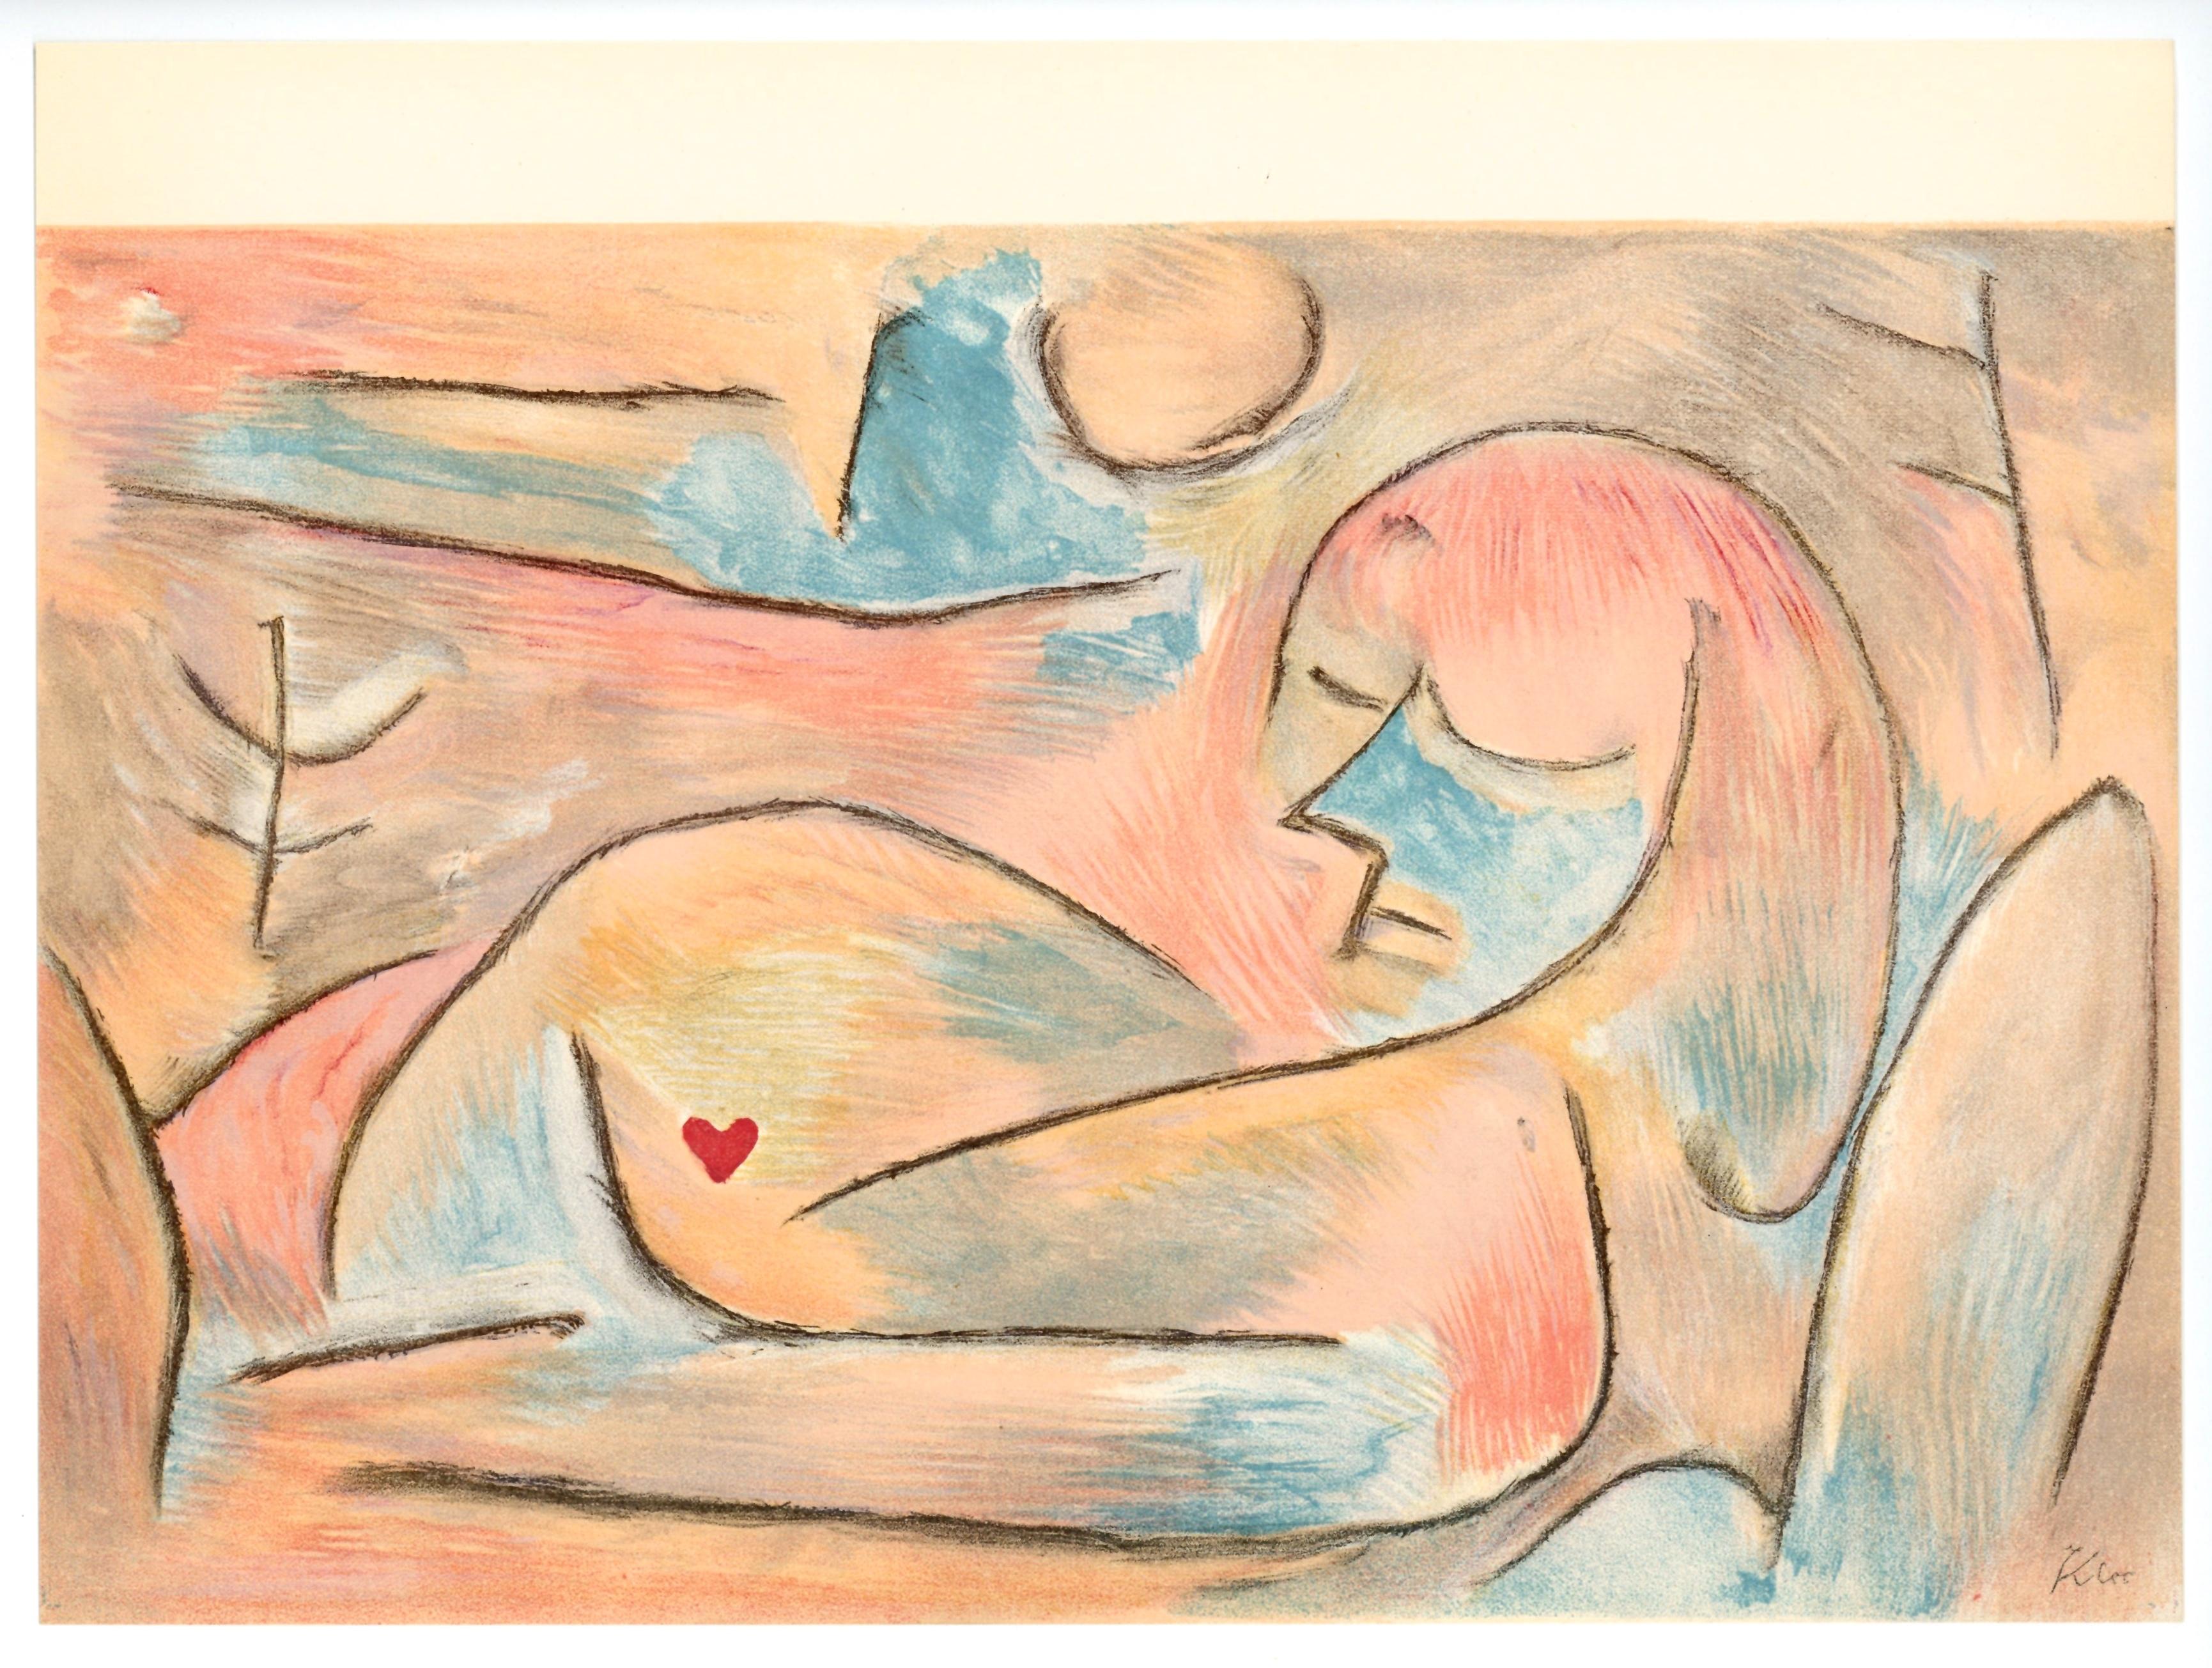 "L'Hiver" lithograph - Print by Paul Klee